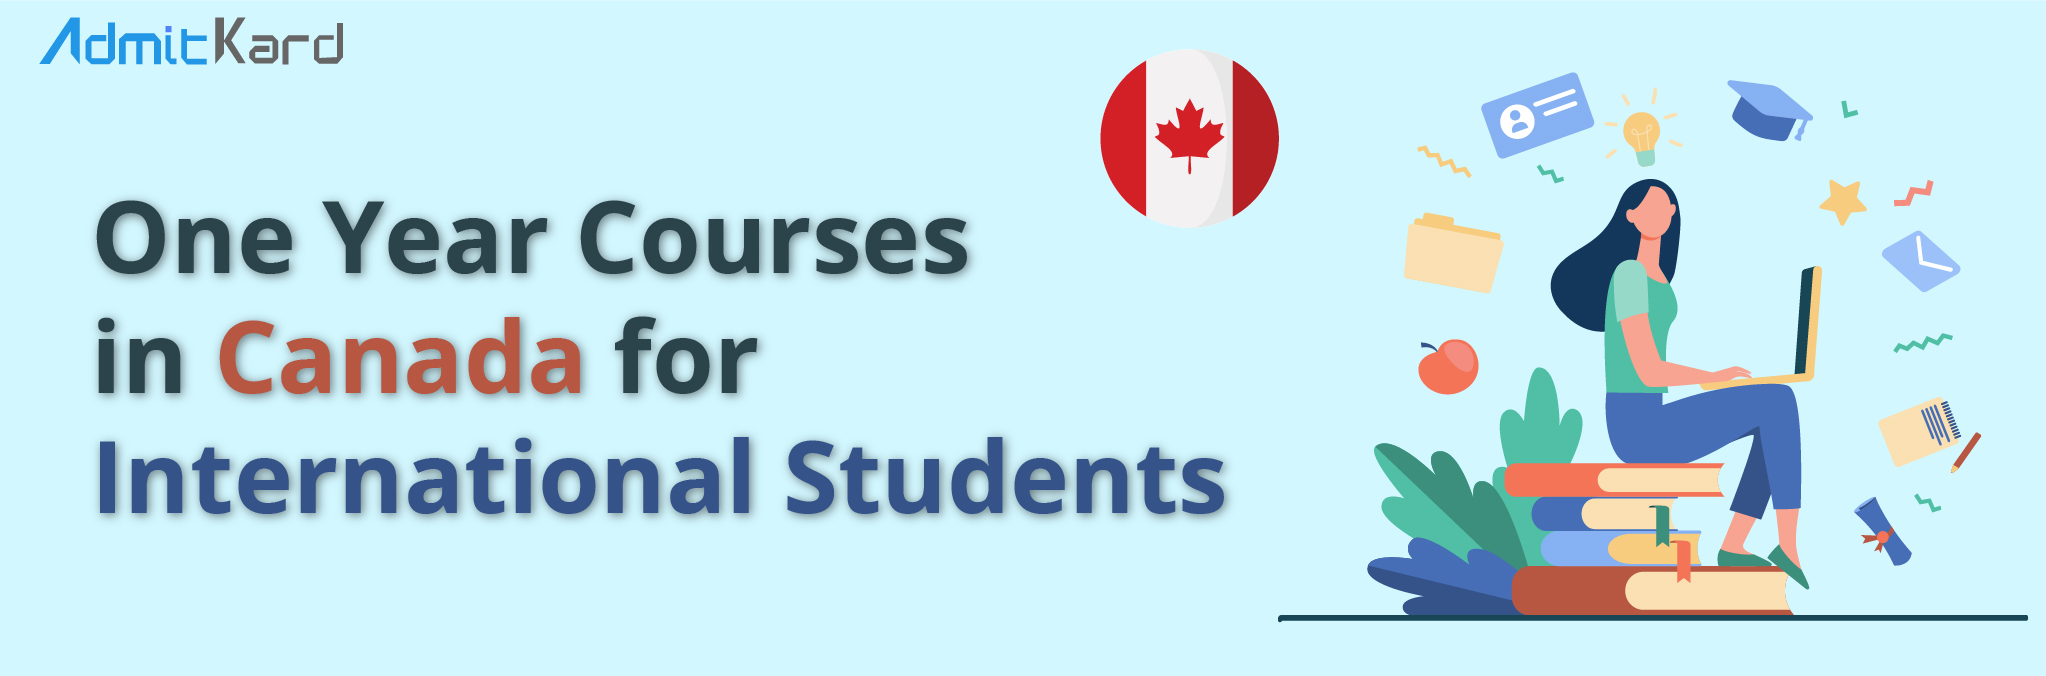 1 Year PG Diploma Courses In Canada (2020) - Admission, Fee ...